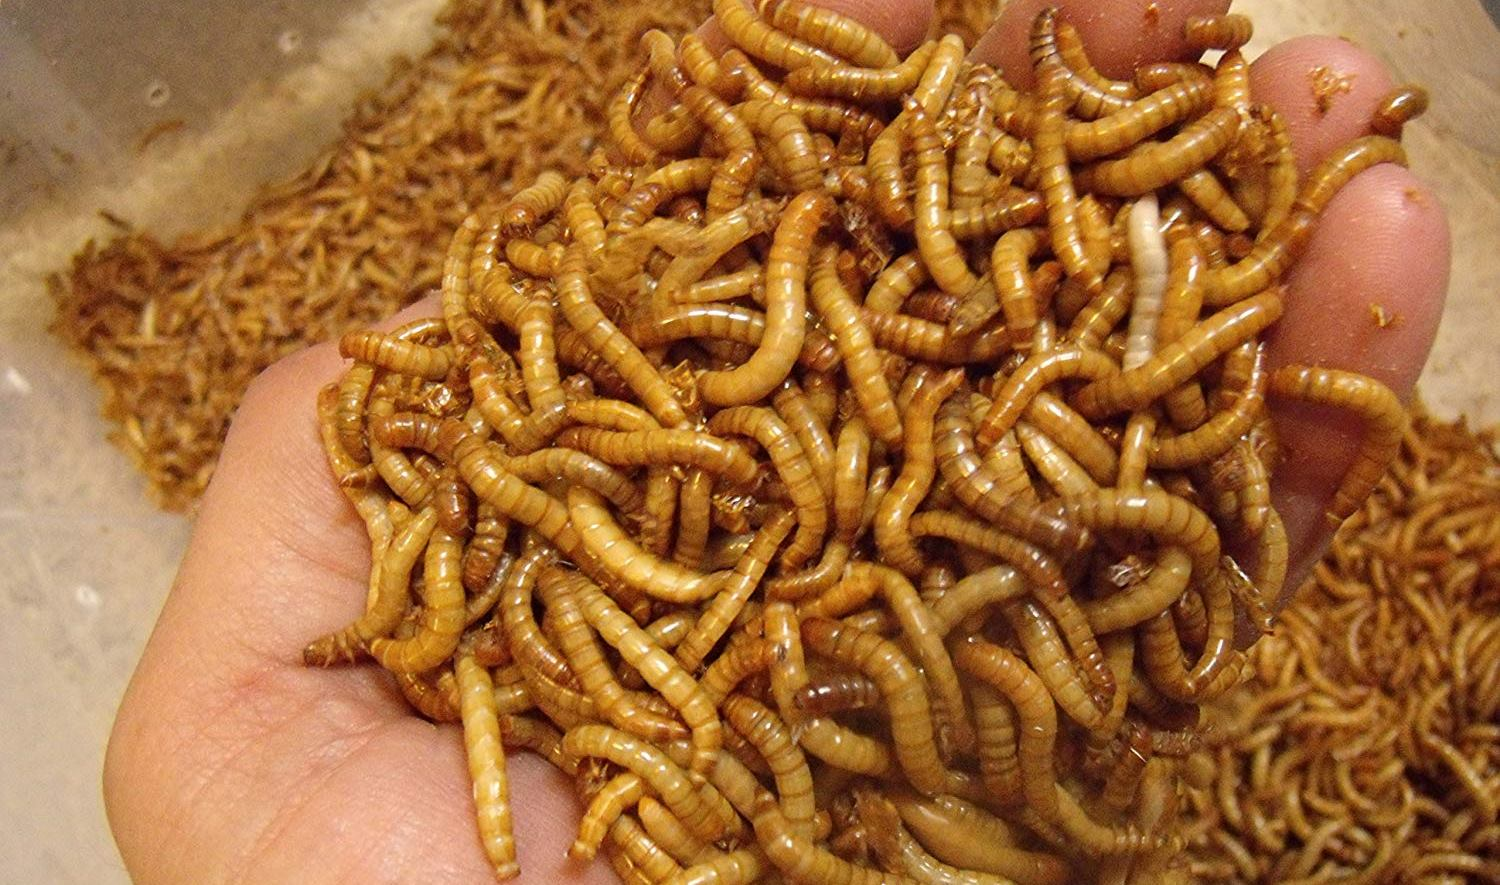 How to Grow Mealworms